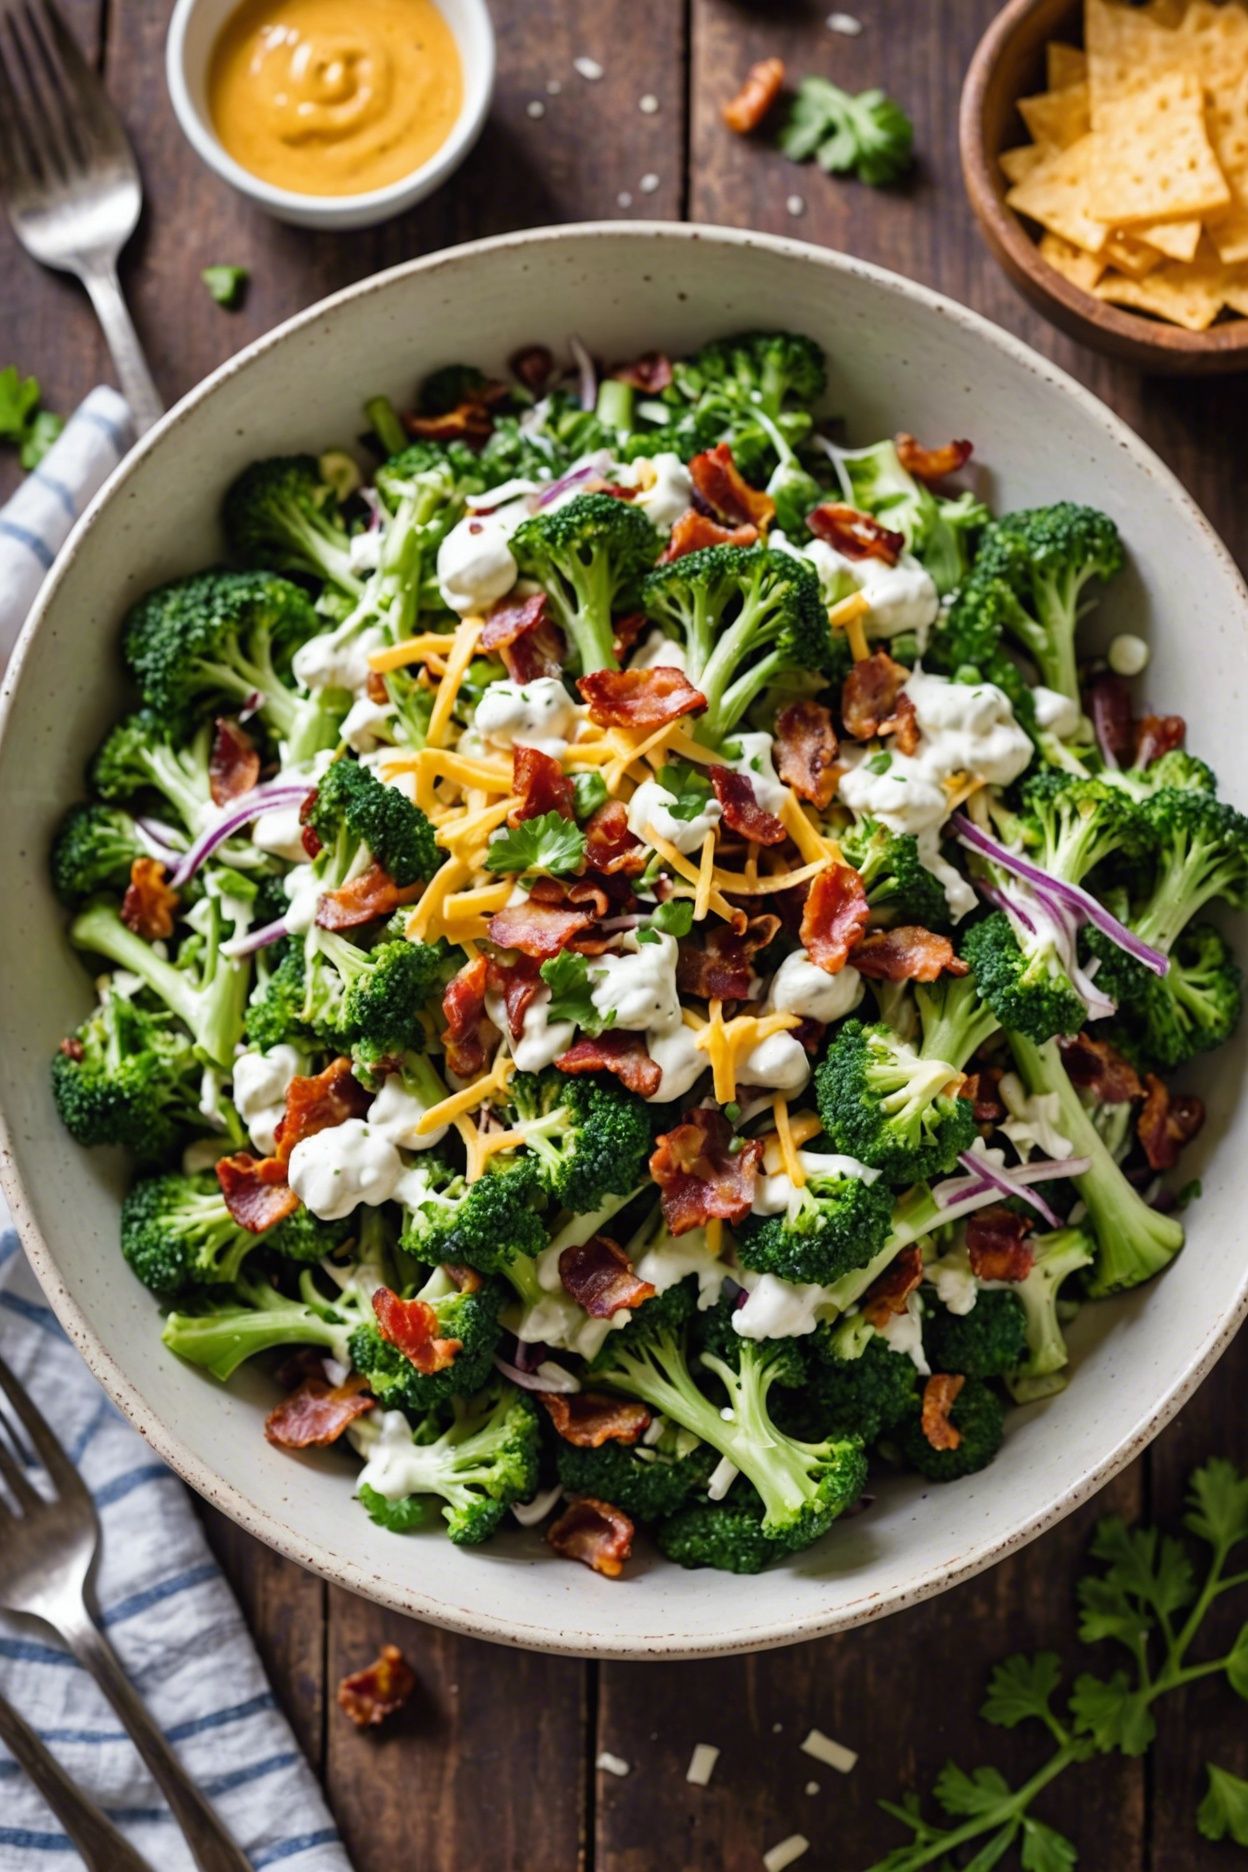 Marties Broccoli Salad With Bacon And Cheese